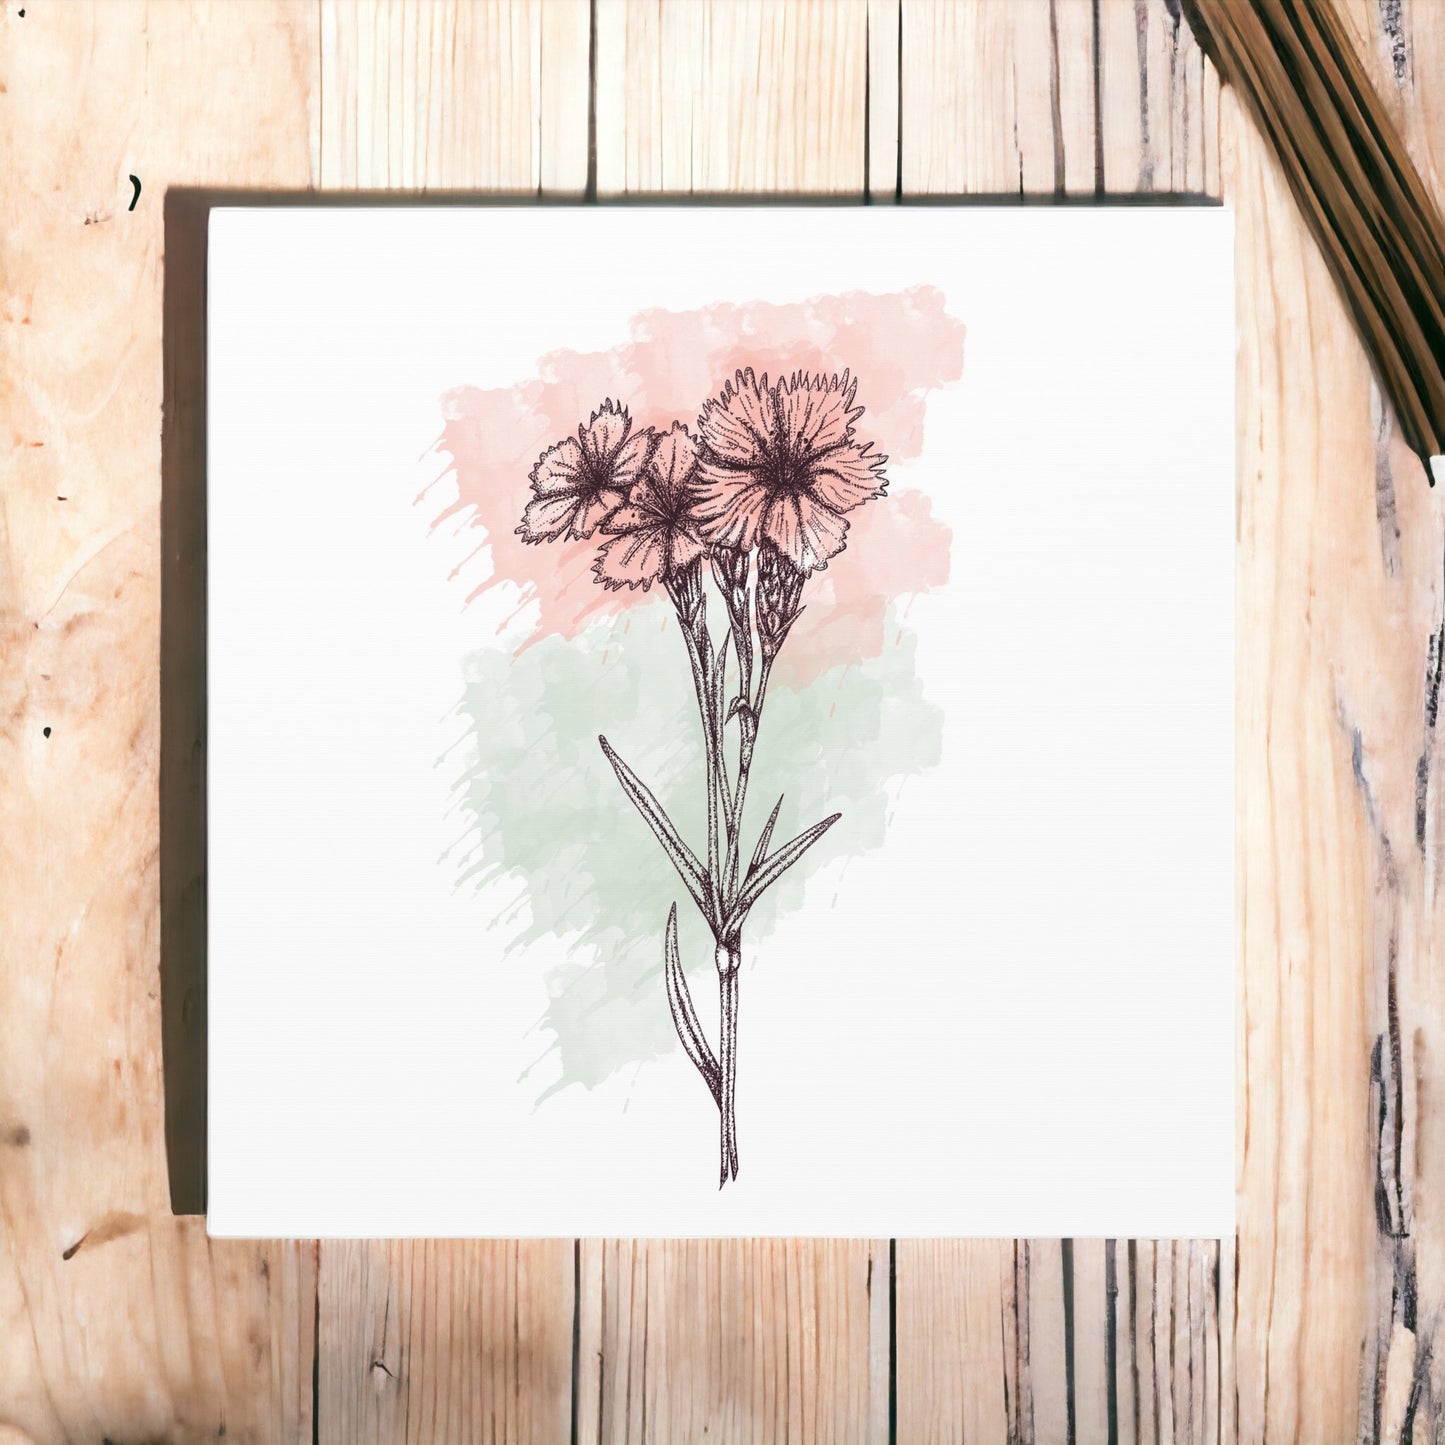 "Minimalist Flower" Wall Art - Weave Got Gifts - Unique Gifts You Won’t Find Anywhere Else!